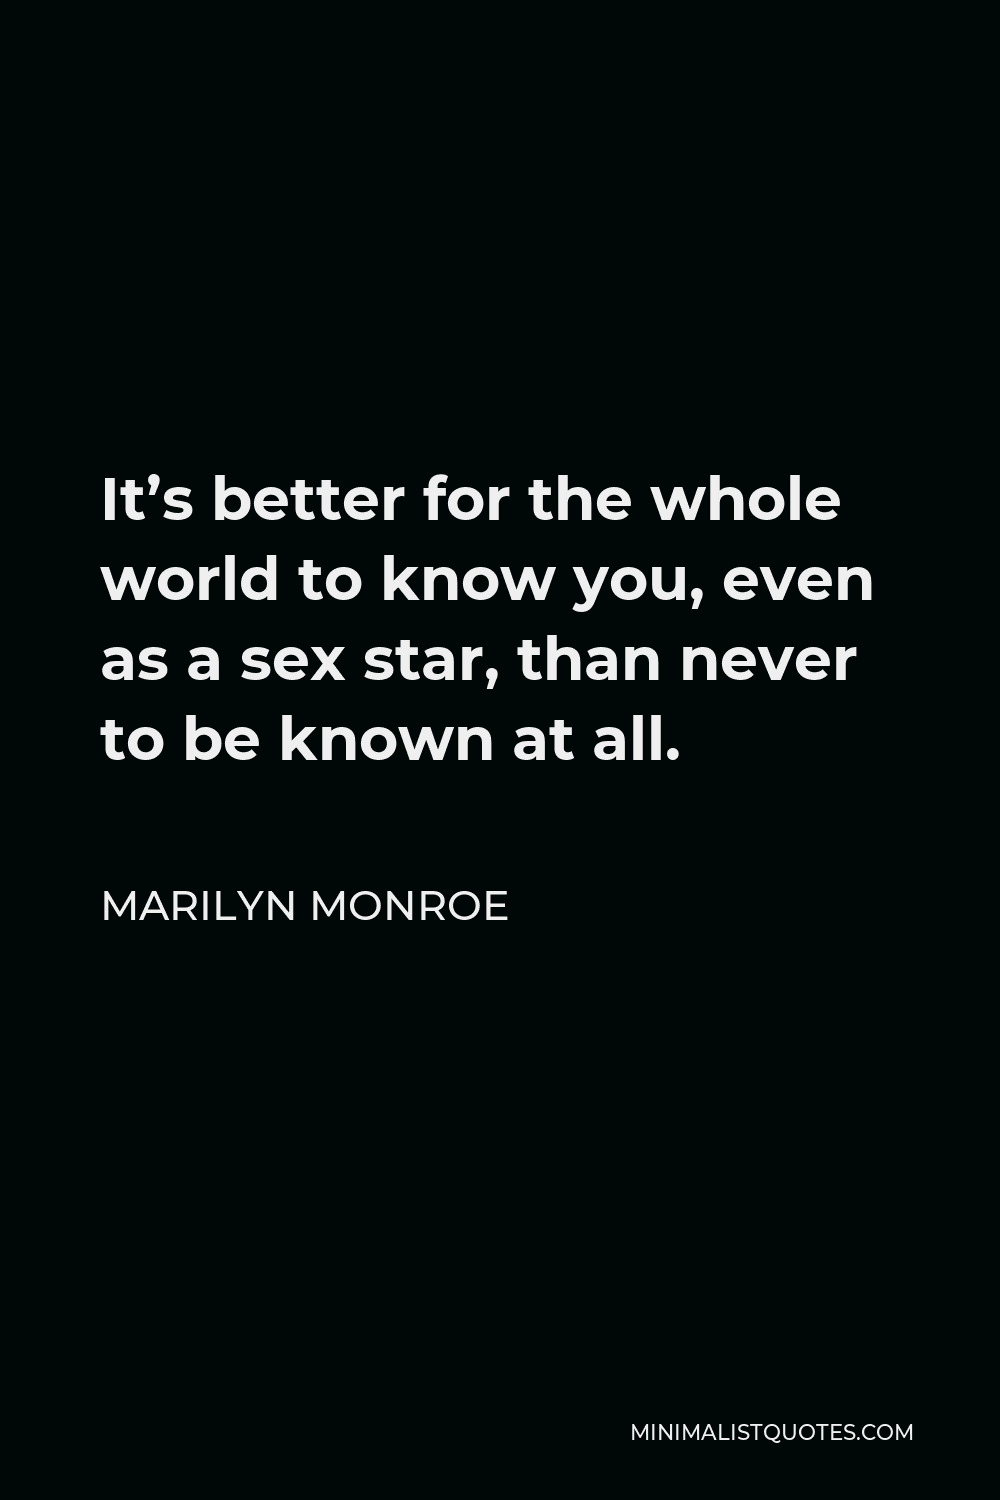 Marilyn Monroe Quote - It’s better for the whole world to know you, even as a sex star, than never to be known at all.